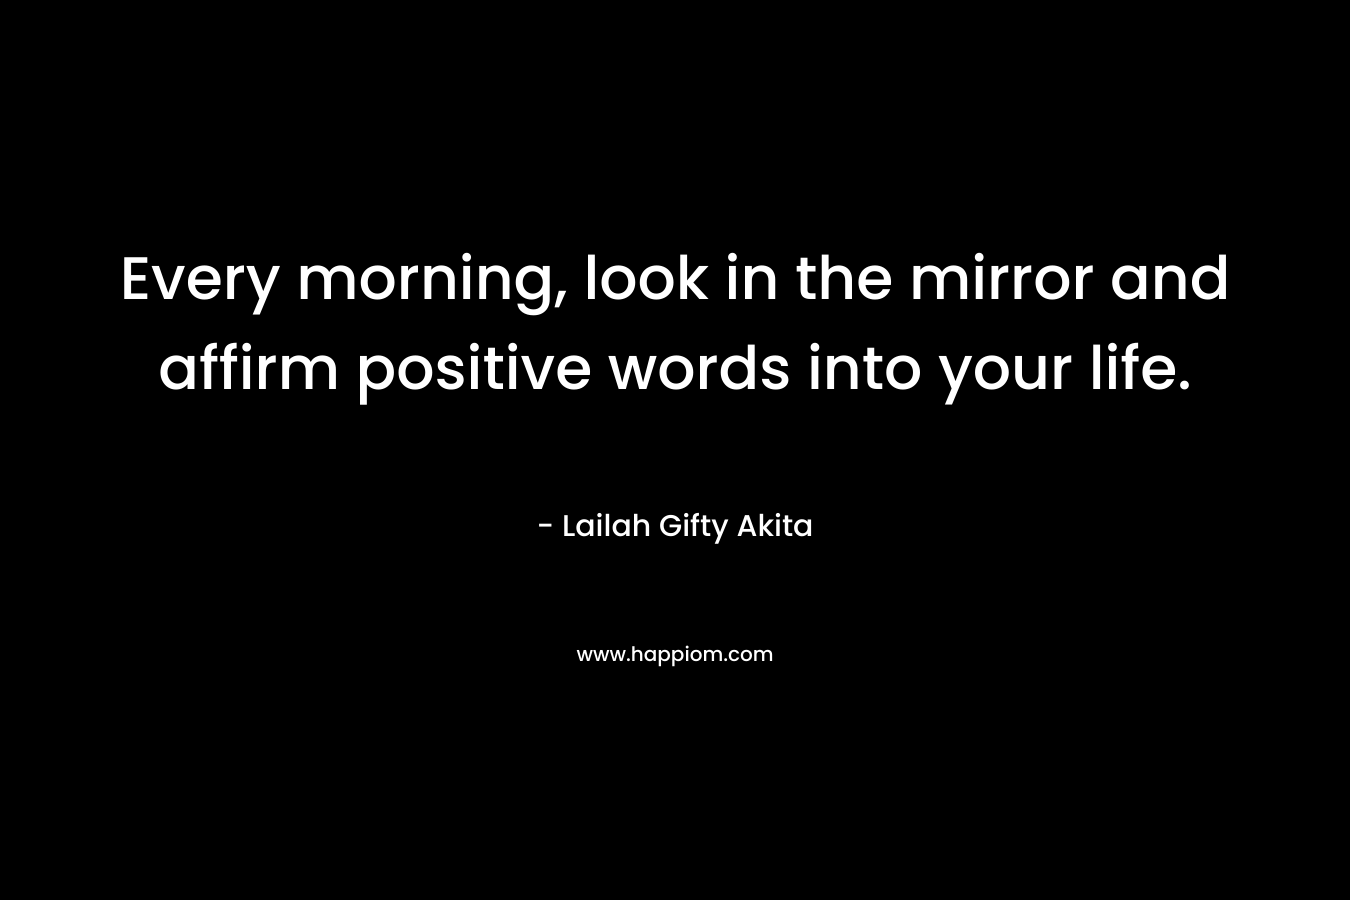 Every morning, look in the mirror and affirm positive words into your life.